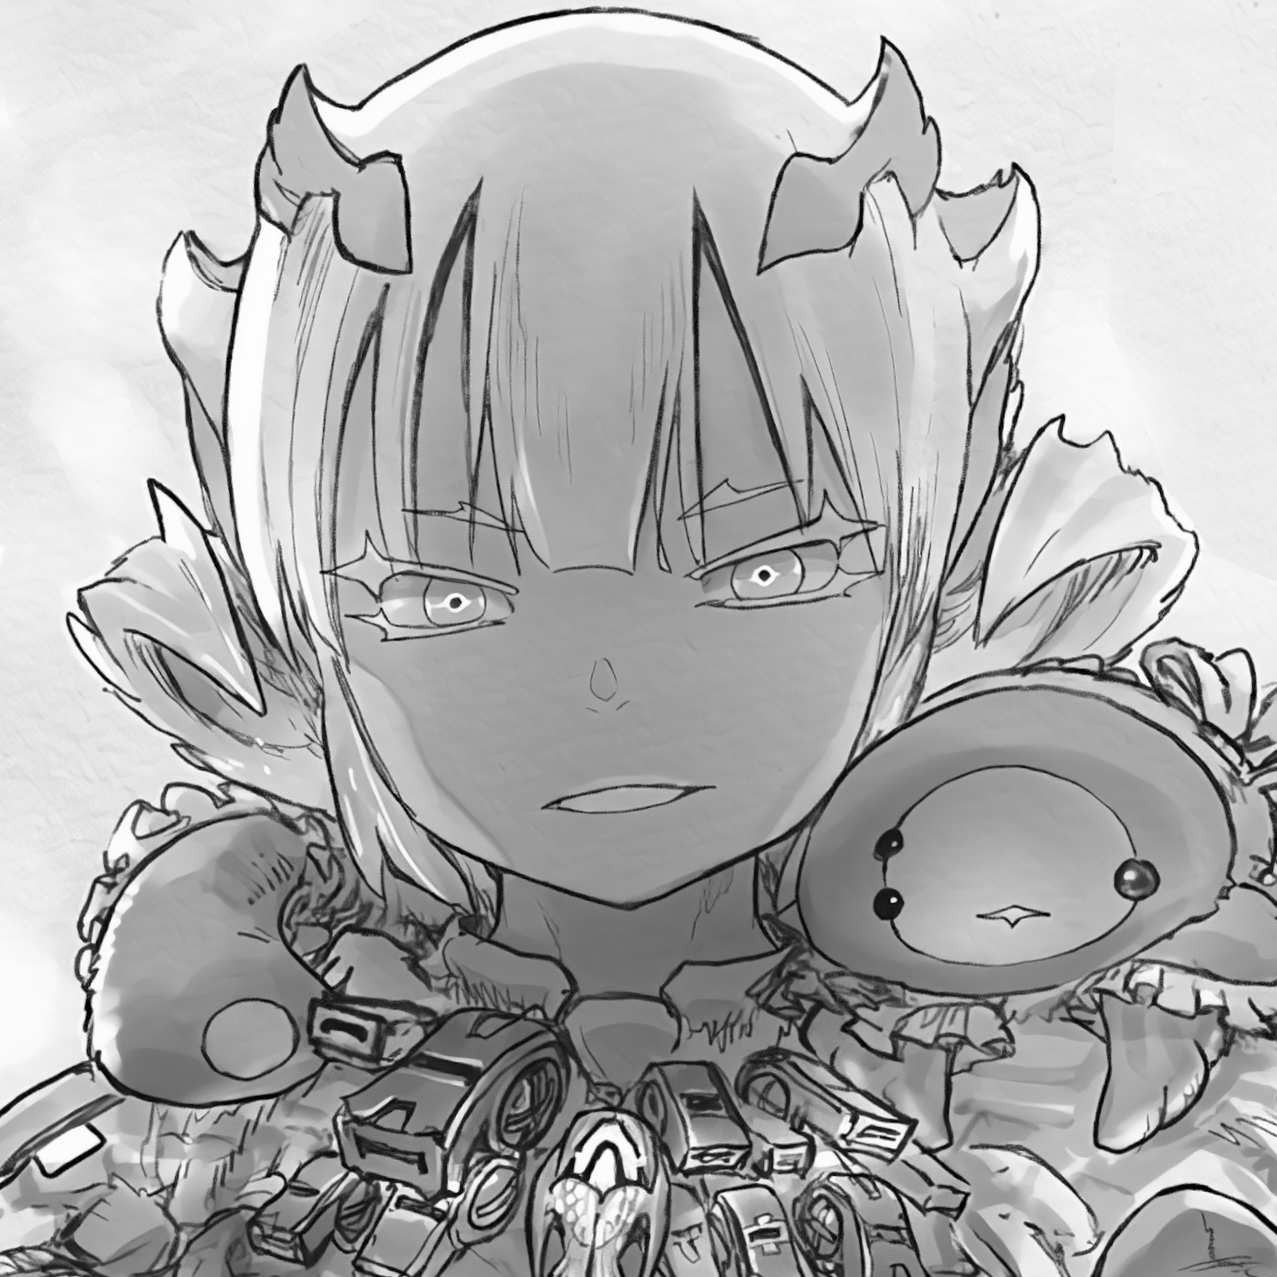 Reg, Made in Abyss Wiki